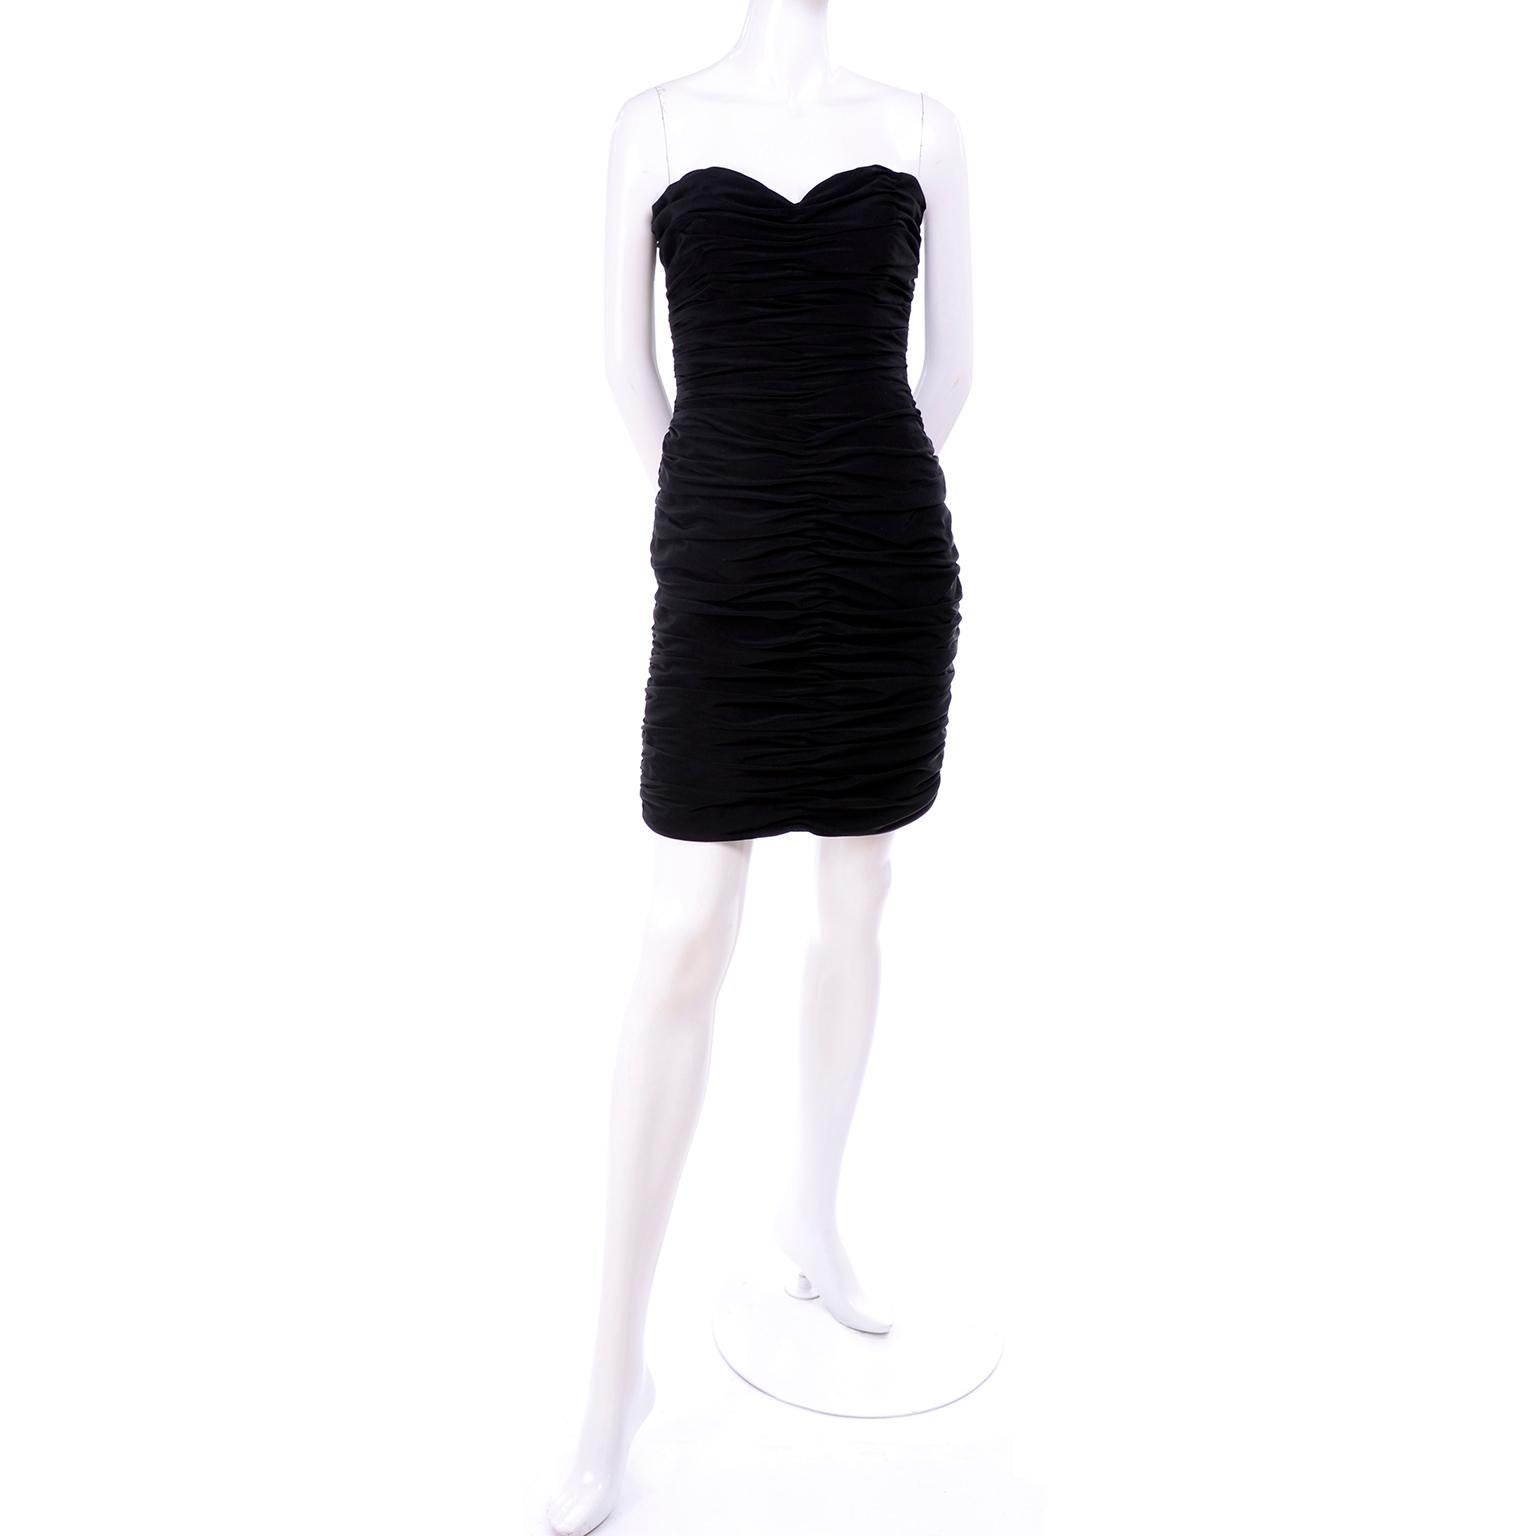 This is a gorgeous 1980's Azzaro Boutique bodycon vintage dress in ruched fine black crepe. The strapless little black dress has a back zipper and boning in the bodice. Fits our size 2 mannequin perfectly! The dress has a label that reads: Betsy and